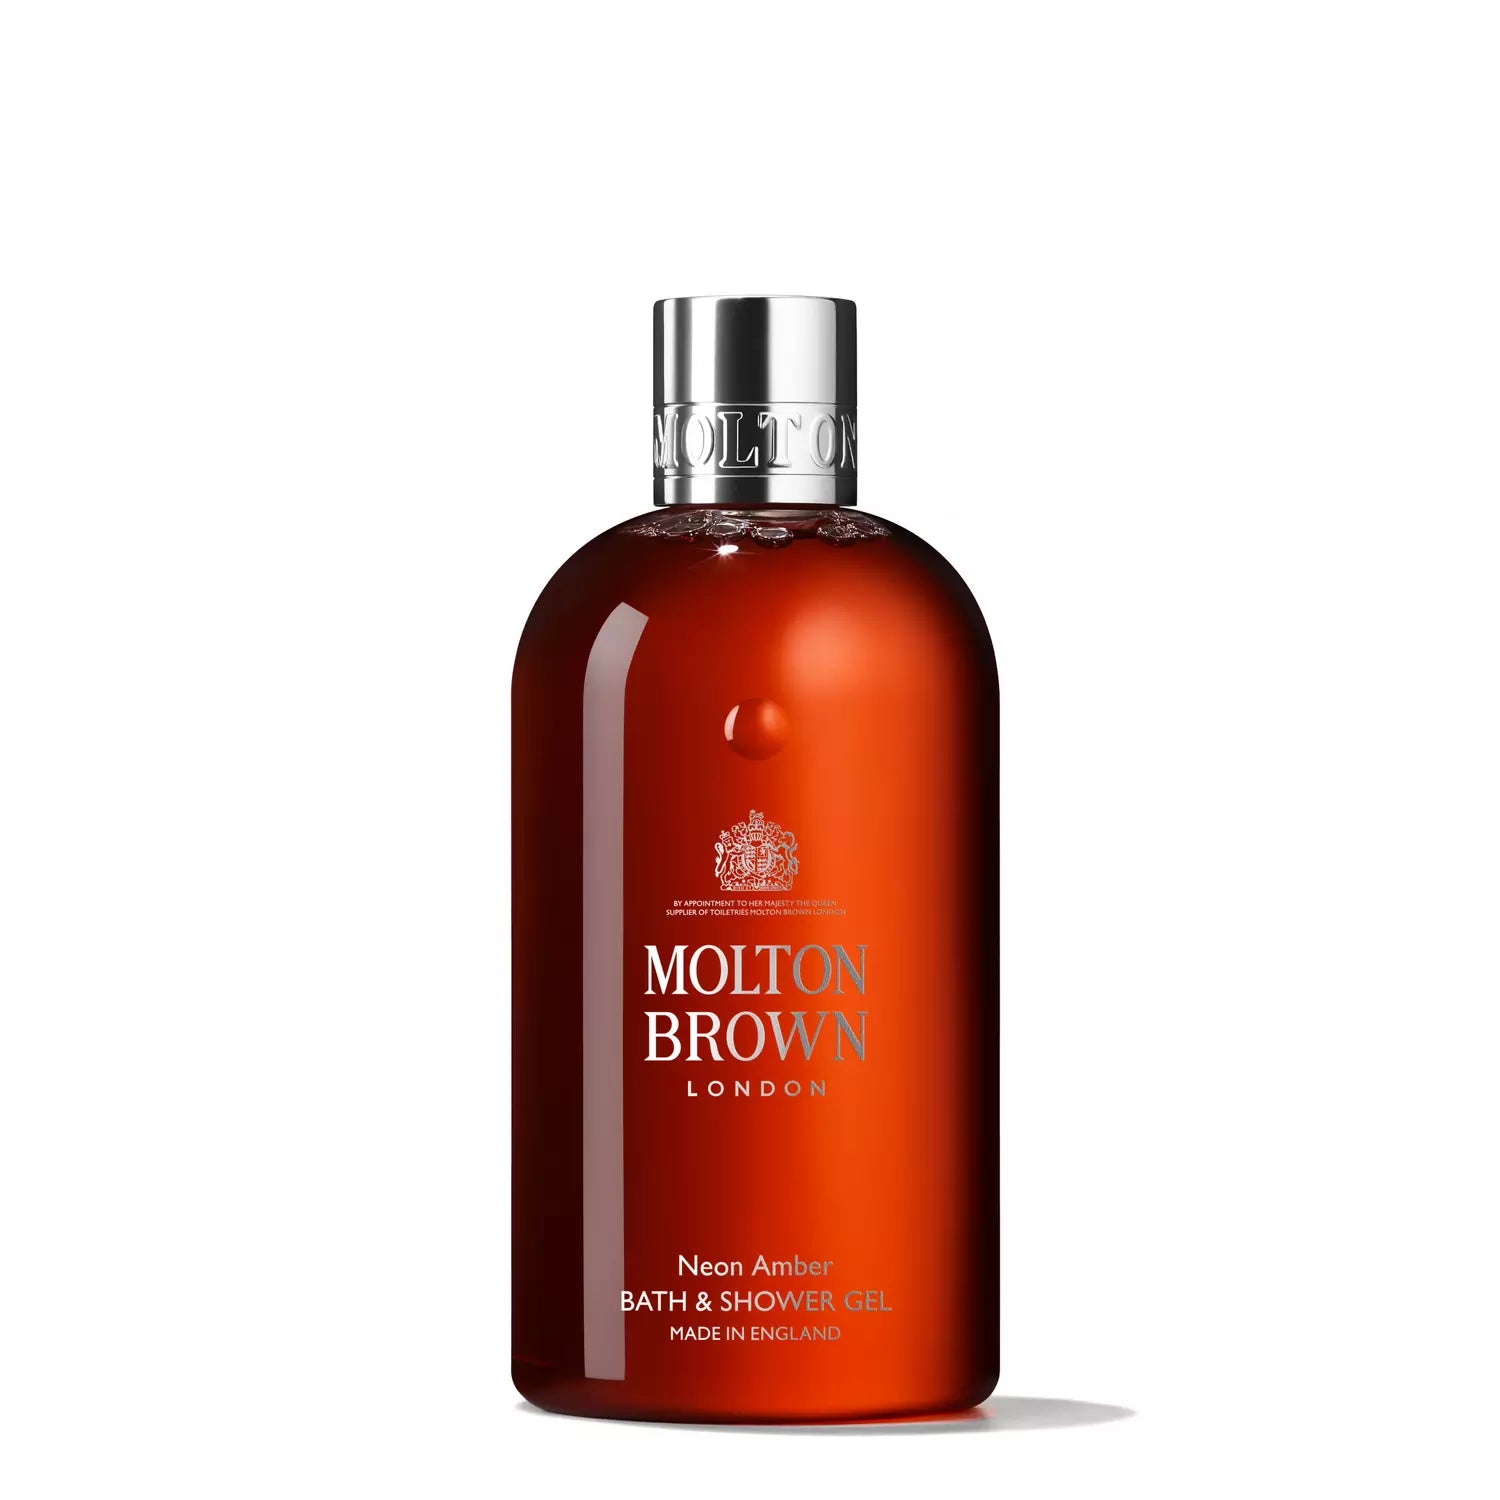 Molton Brown Neon Amber Bath and Shower Gel - Soap & Water Everyday